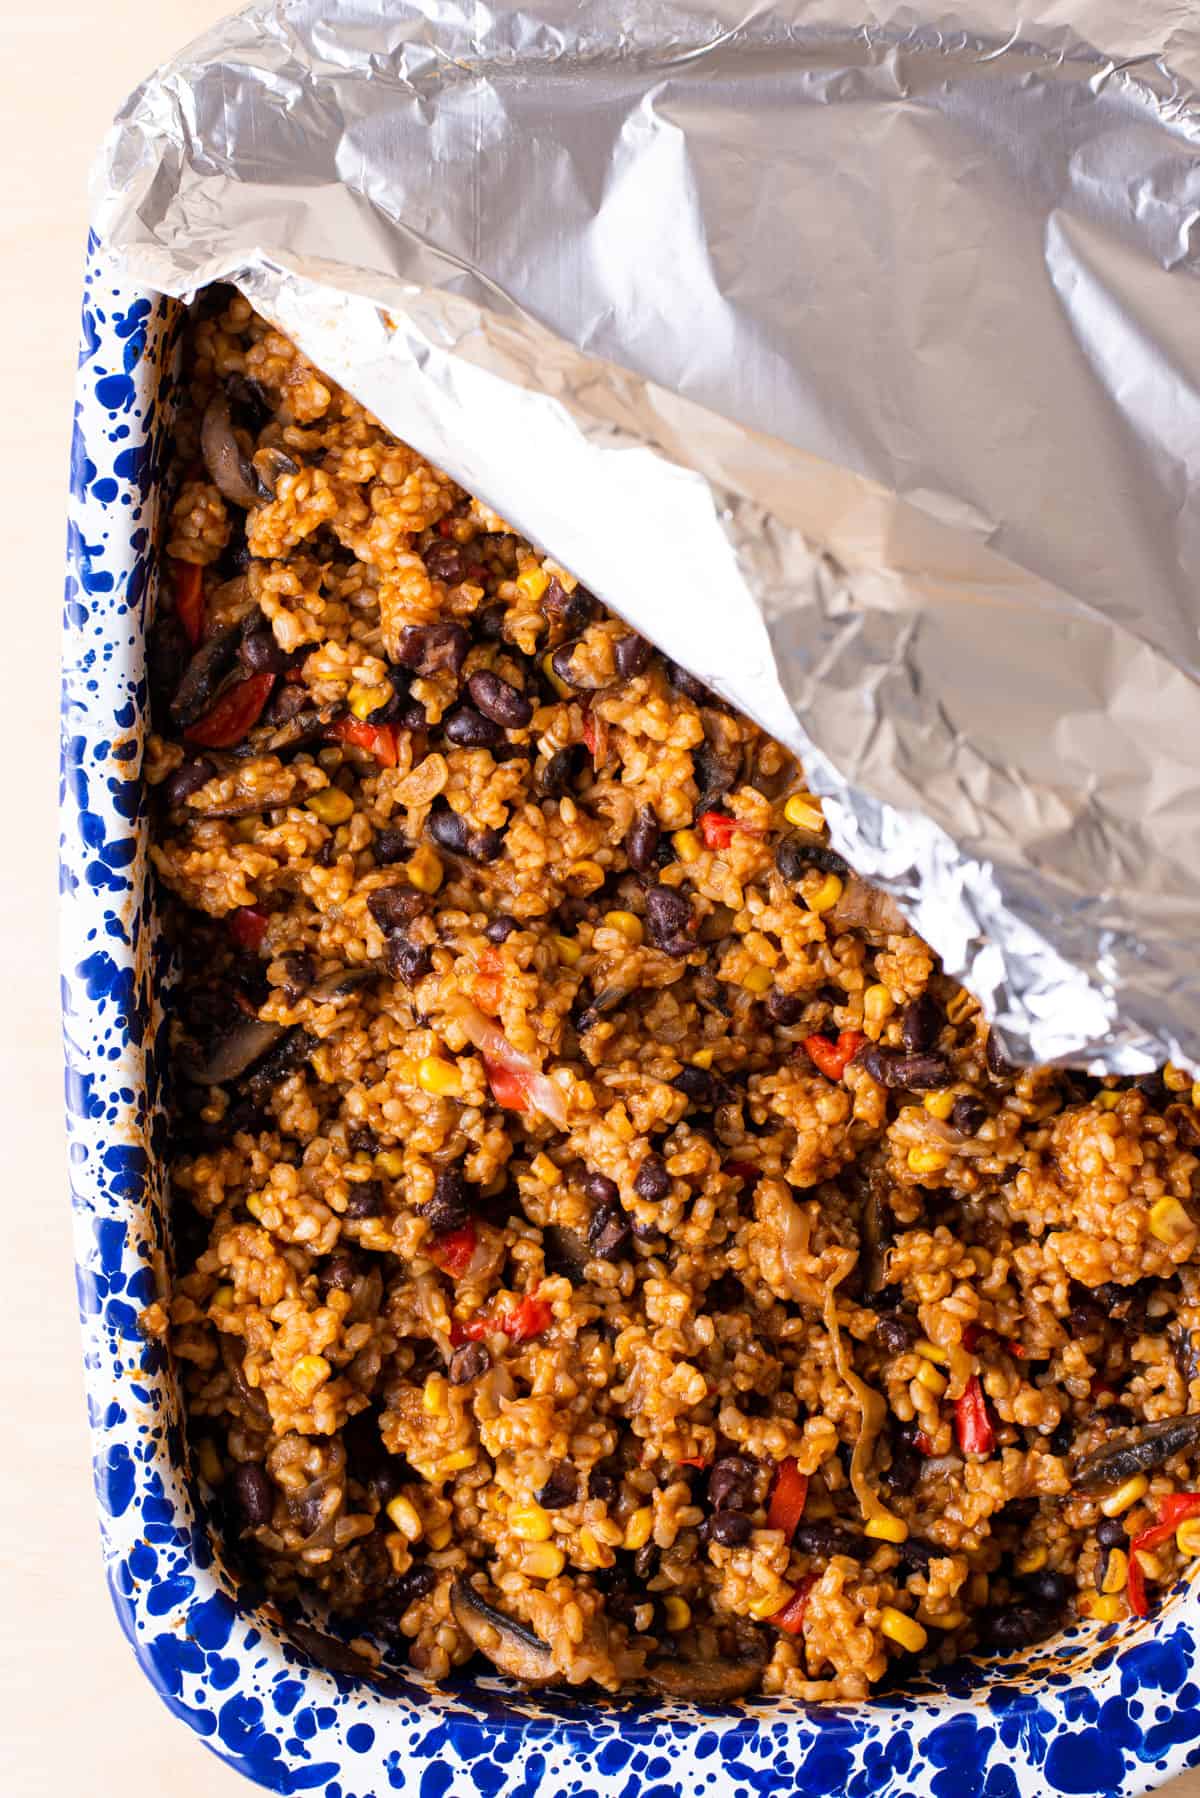 Baked rice and beans casserole covered with foil.